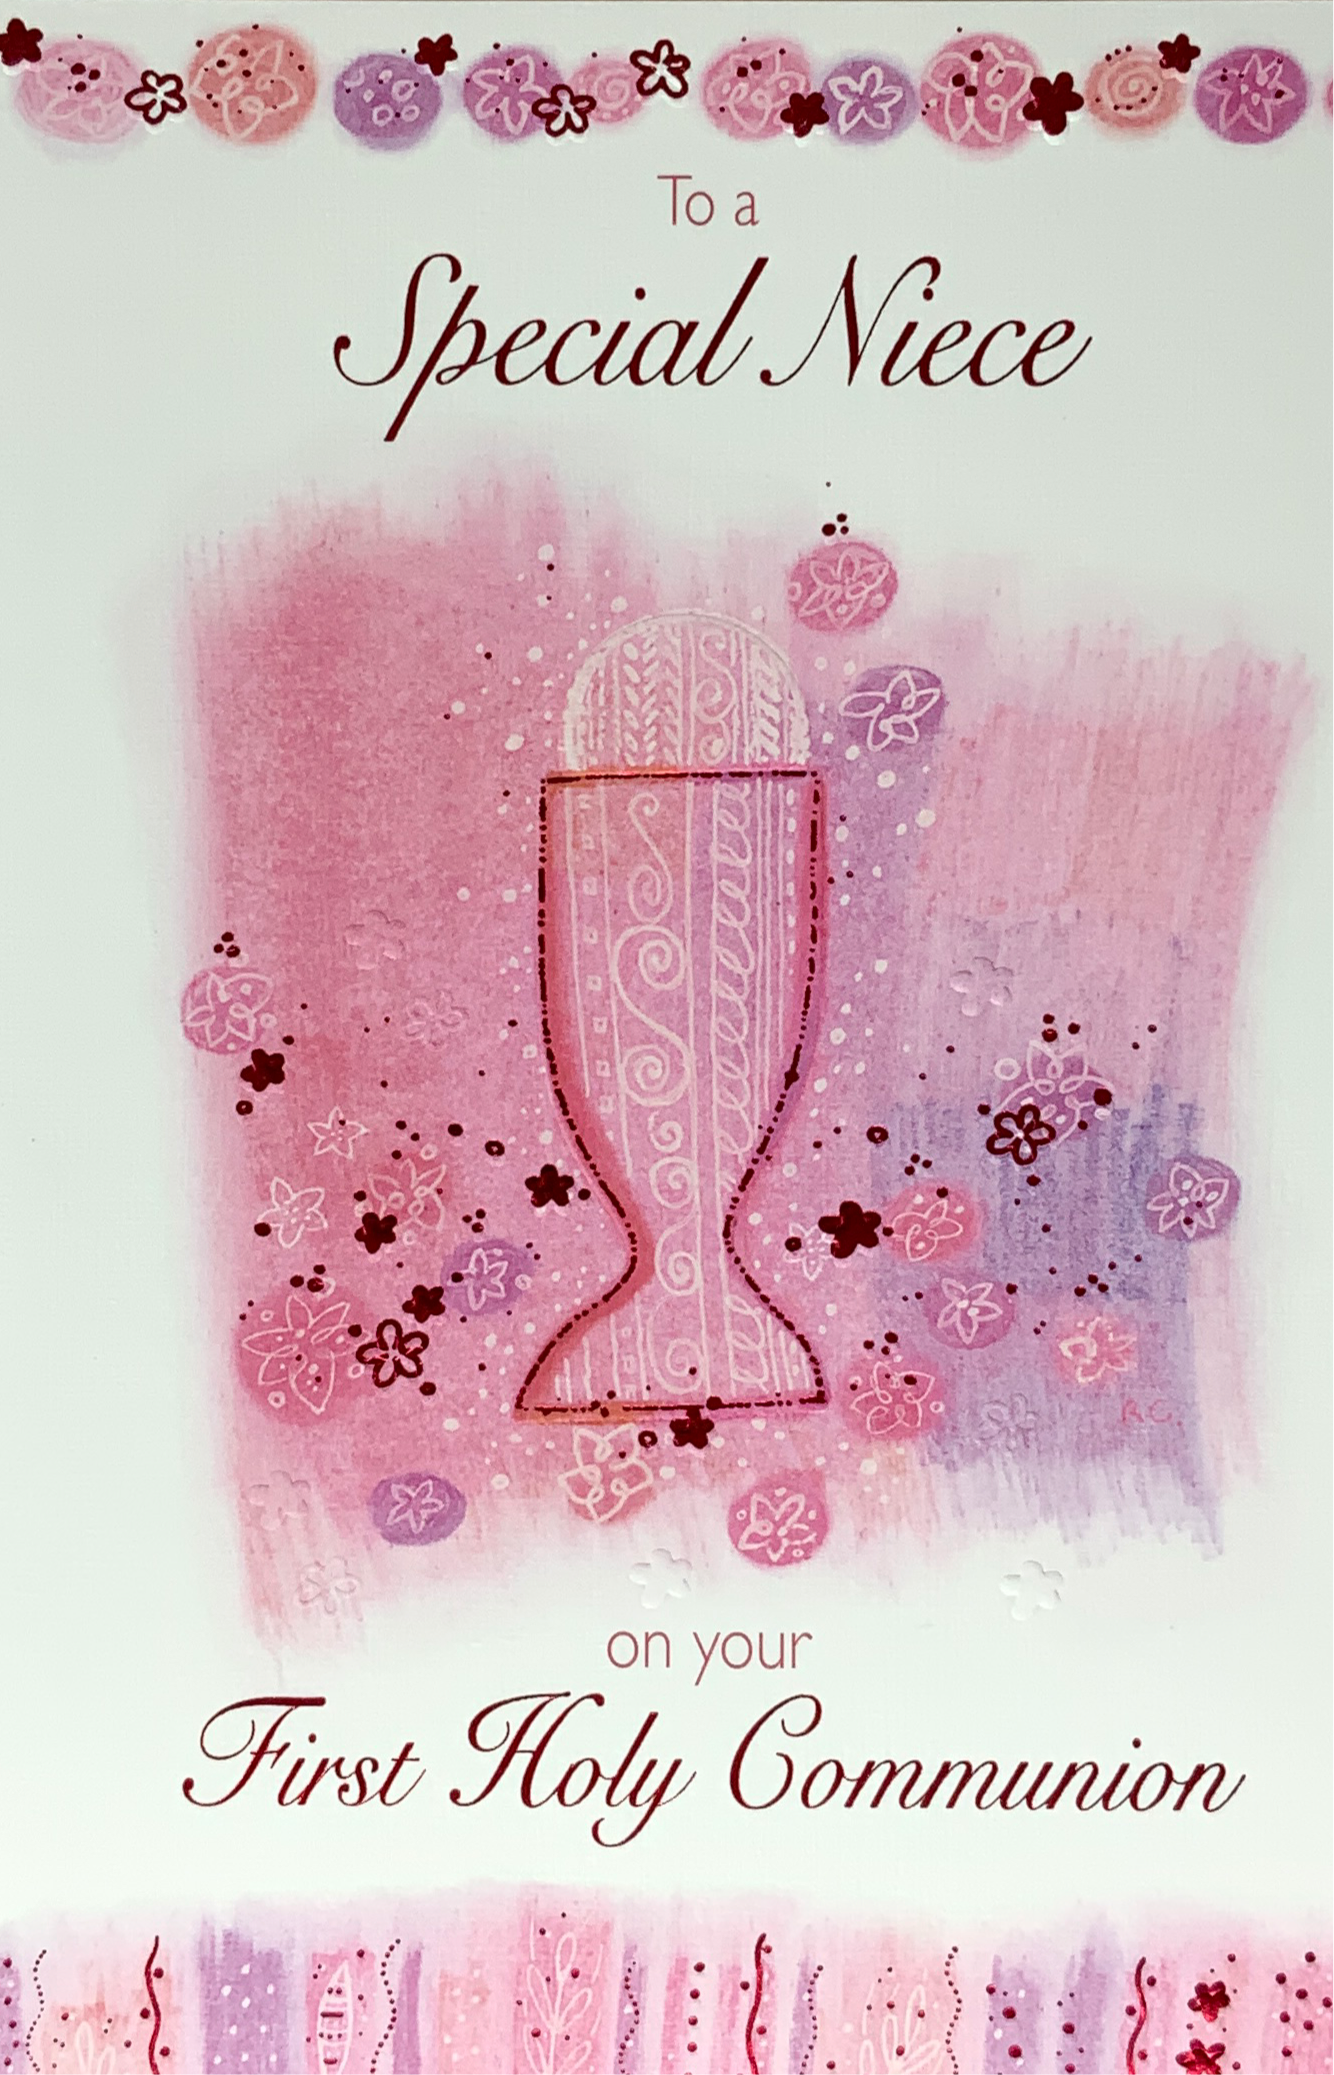 Communion Card - Congratulations On Your Very Special Day